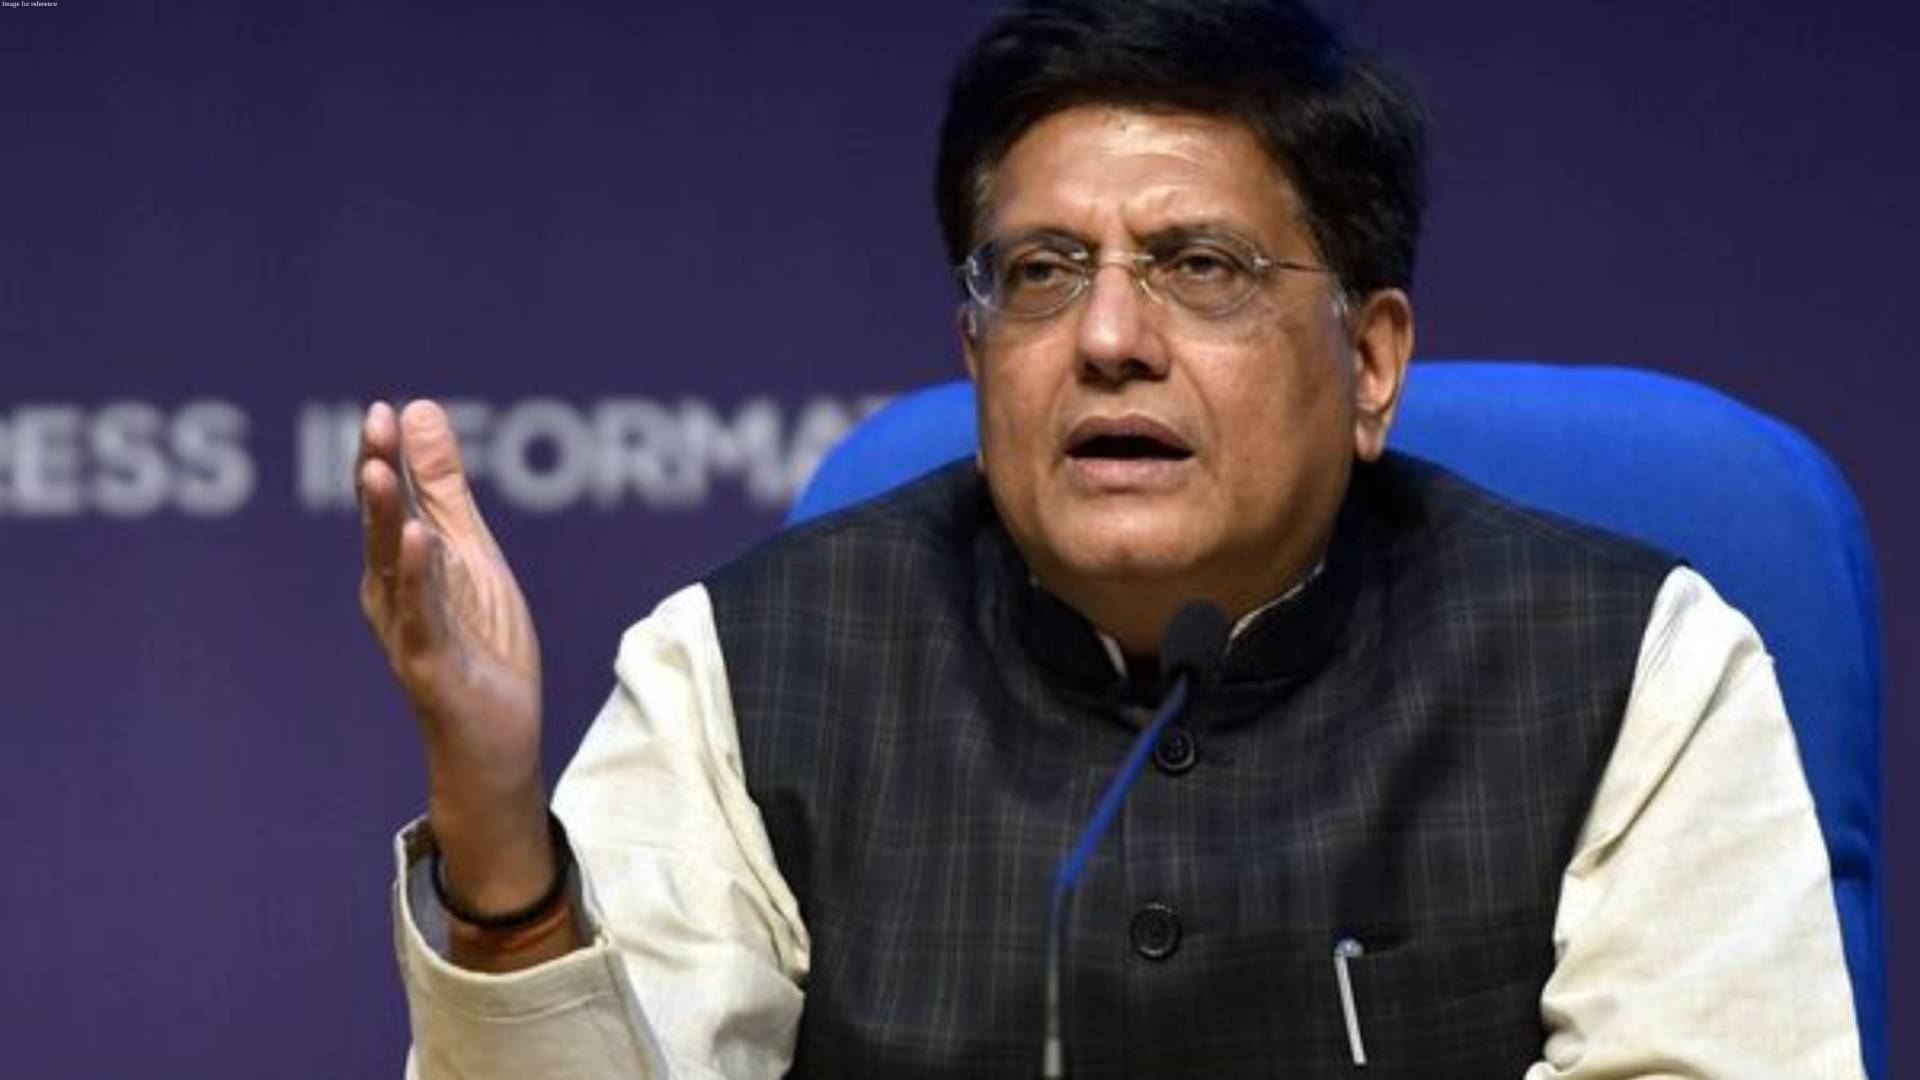 India is most favoured nation for investment, with growth safety and stable currency: Piyush Goyal